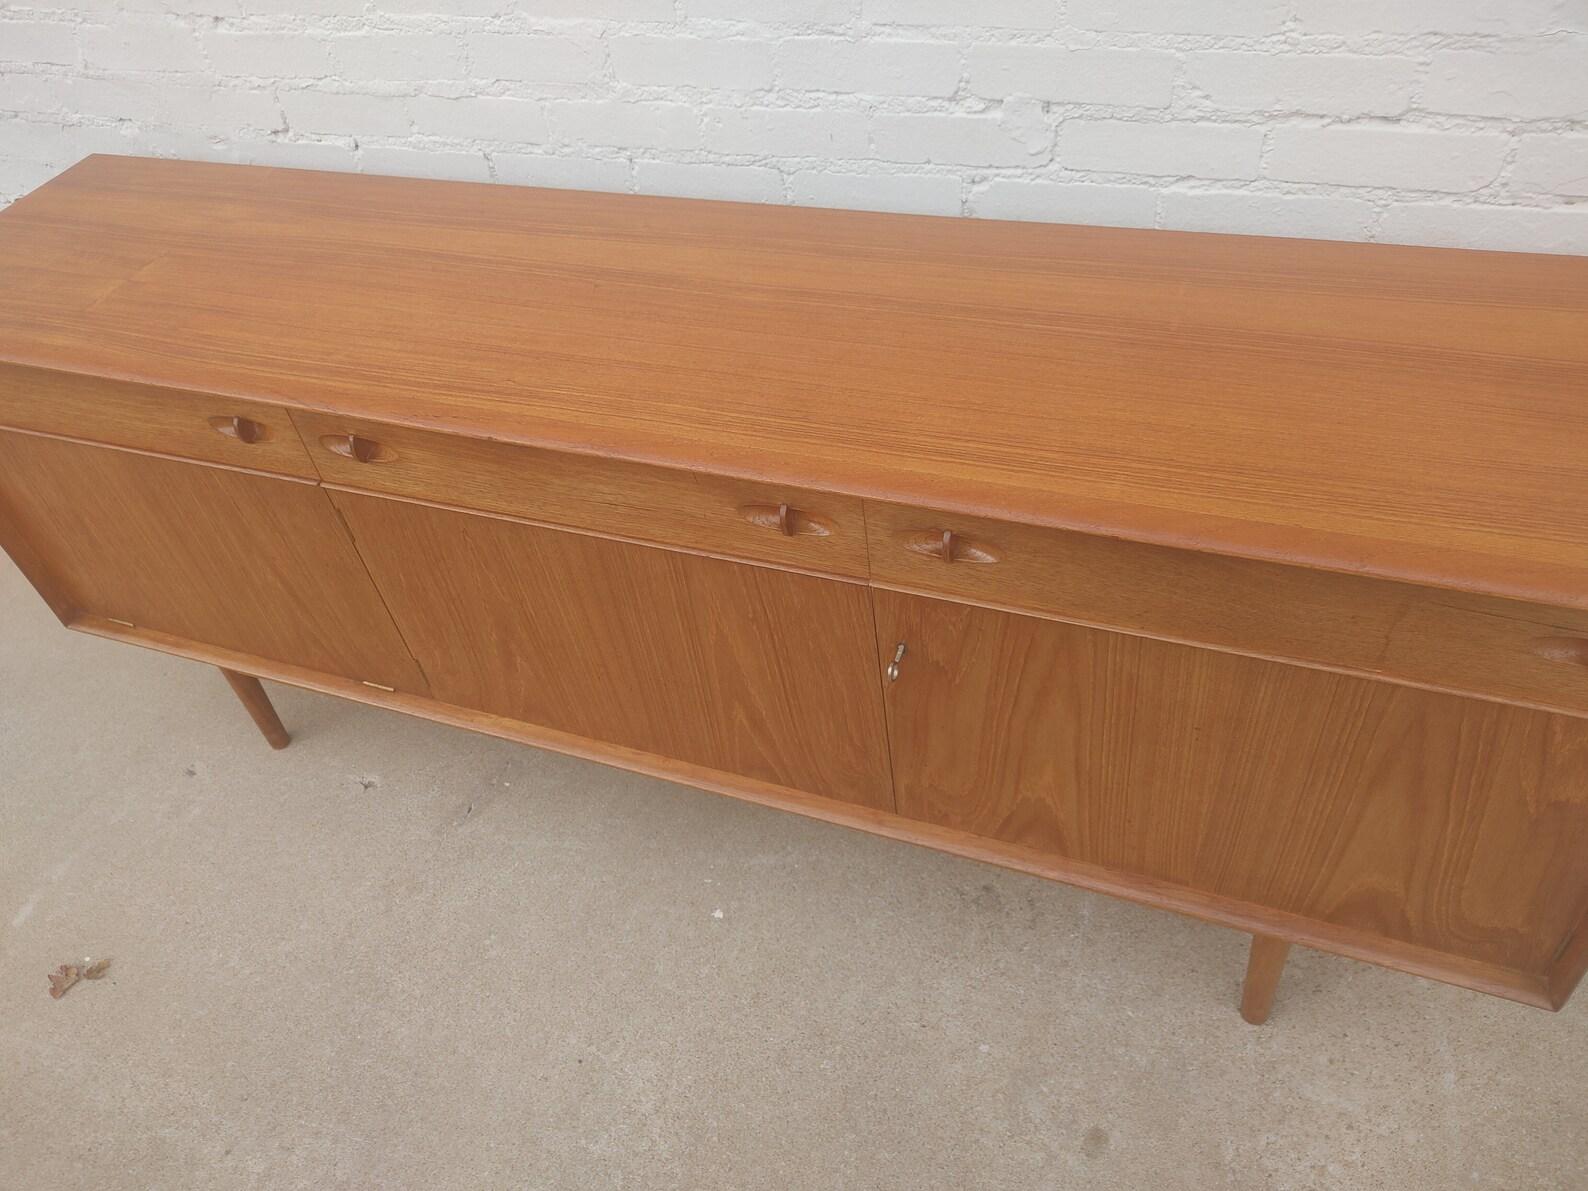 Mid Century English Modern Teak Sideboard

Above average vintage condition and structurally sound. Has some expected slight finish wear and scratching. Top has been refinished and does not have original factory finish. Back is finished. Outdoor